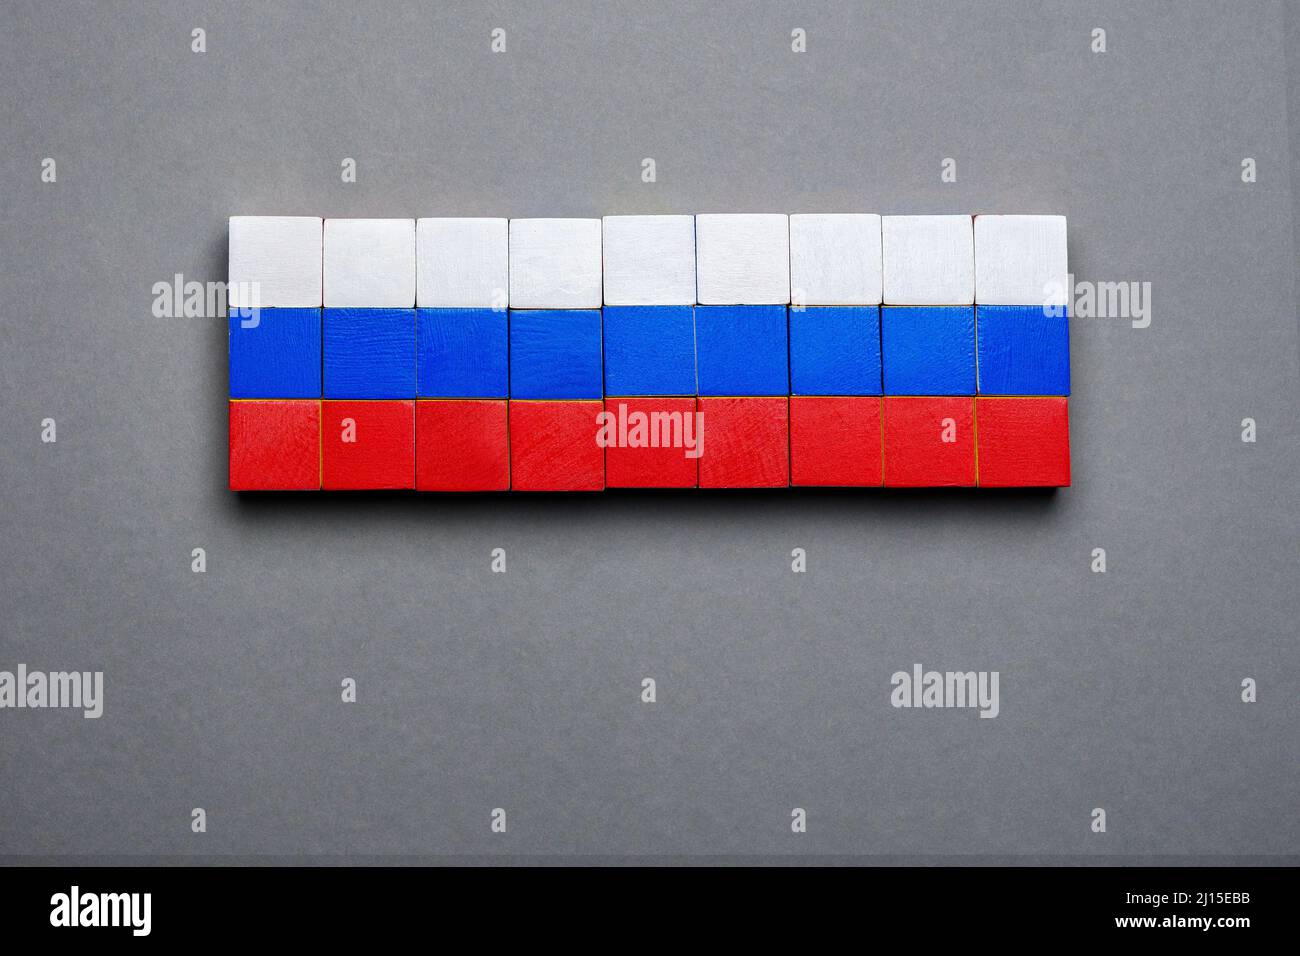 Wooden block background Russian banner design national flag symbolic Russia symbol national banner background RU sign. Isolated block toy wood cube Stock Photo